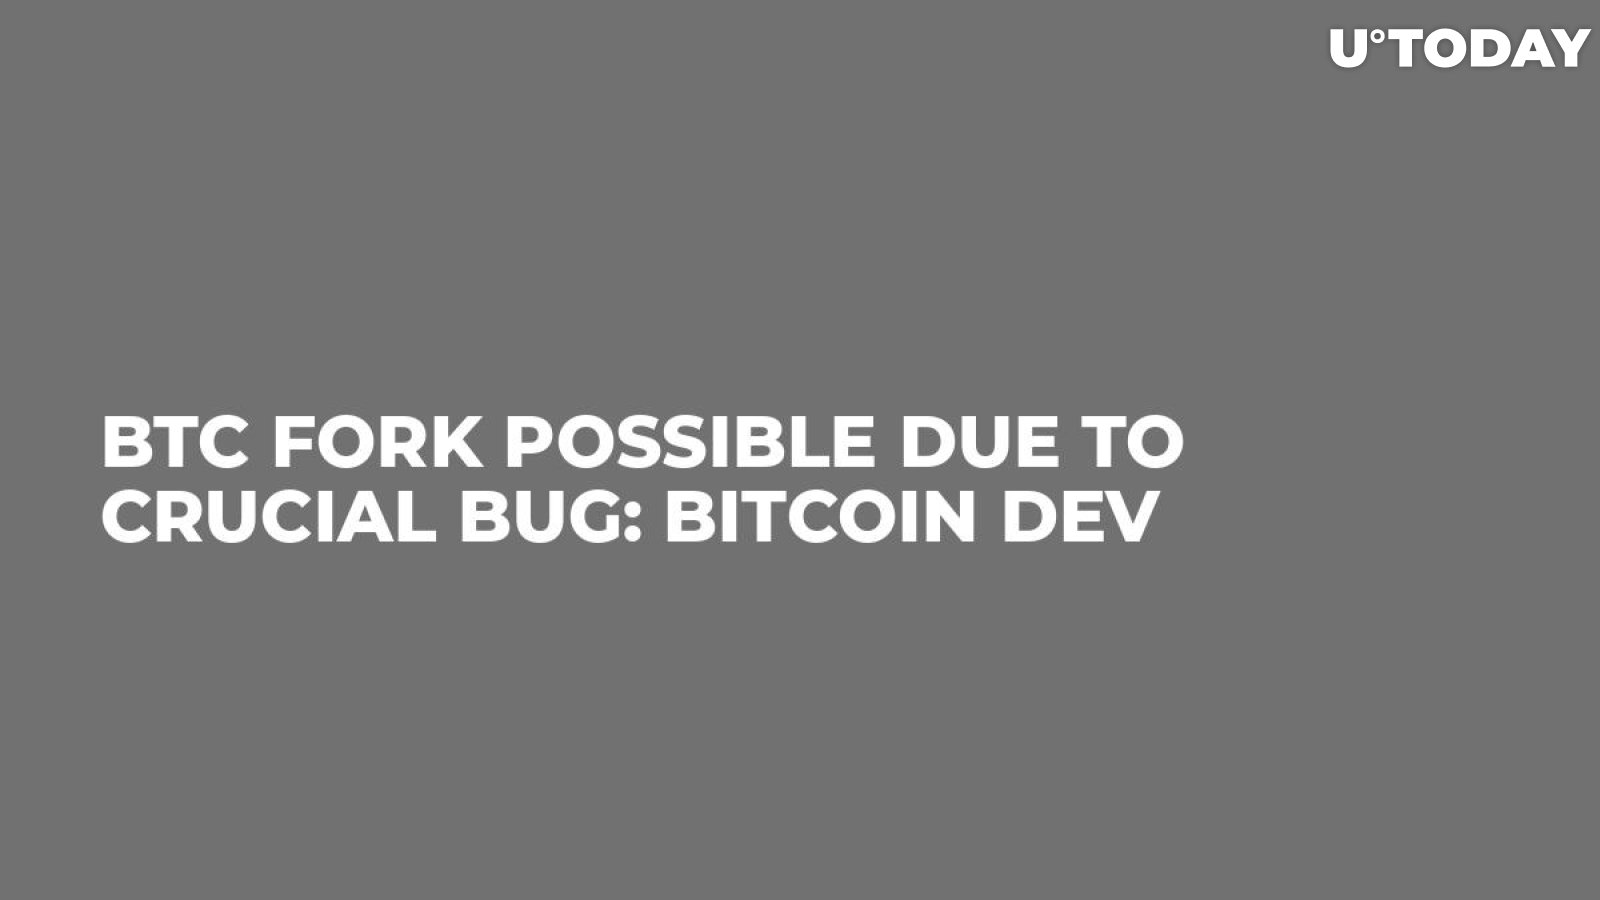 BTC Fork Possible Due to Crucial Bug: Bitcoin Dev